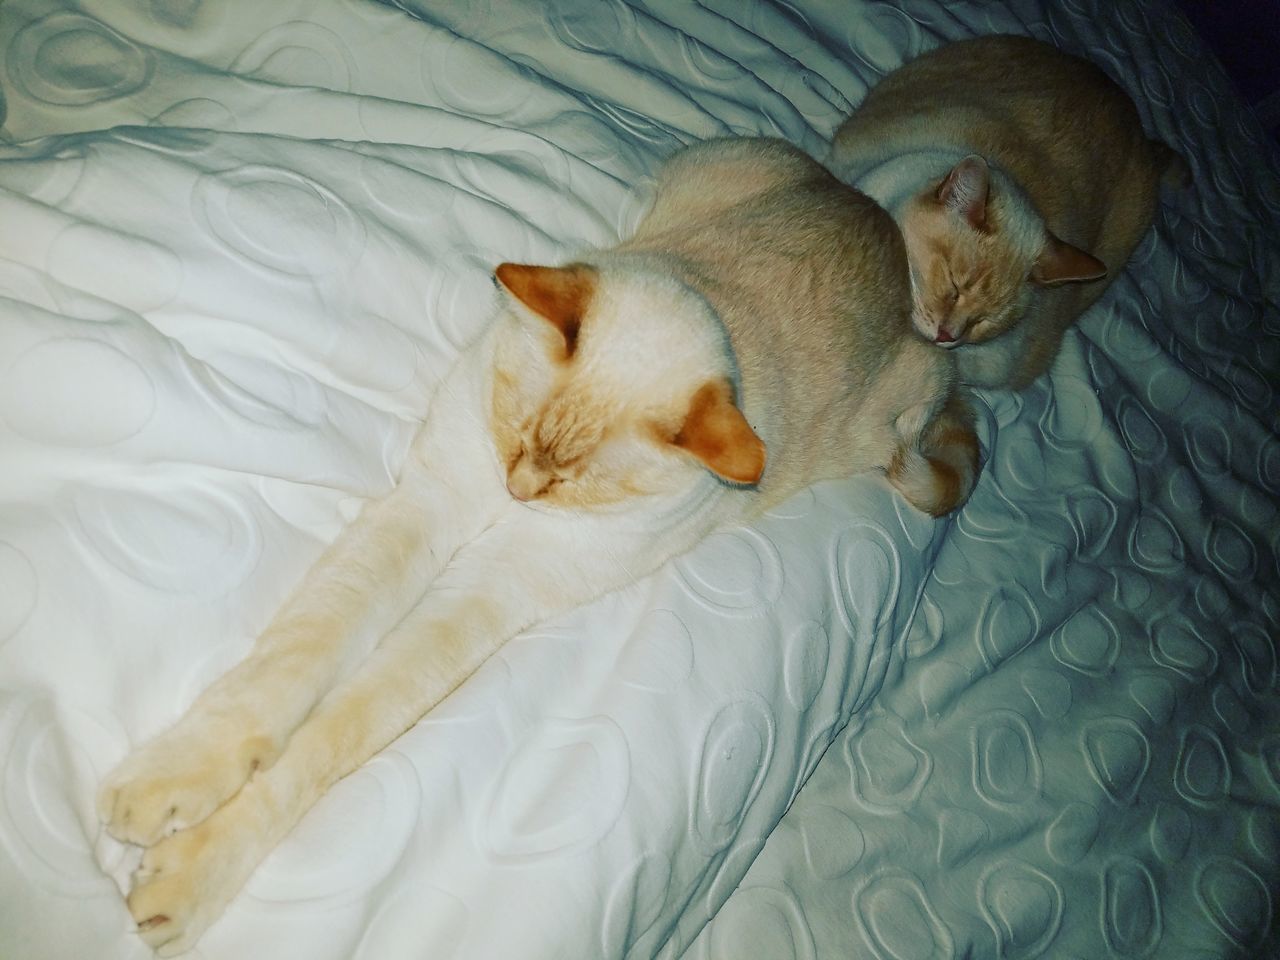 HIGH ANGLE VIEW OF CATS SLEEPING ON BED